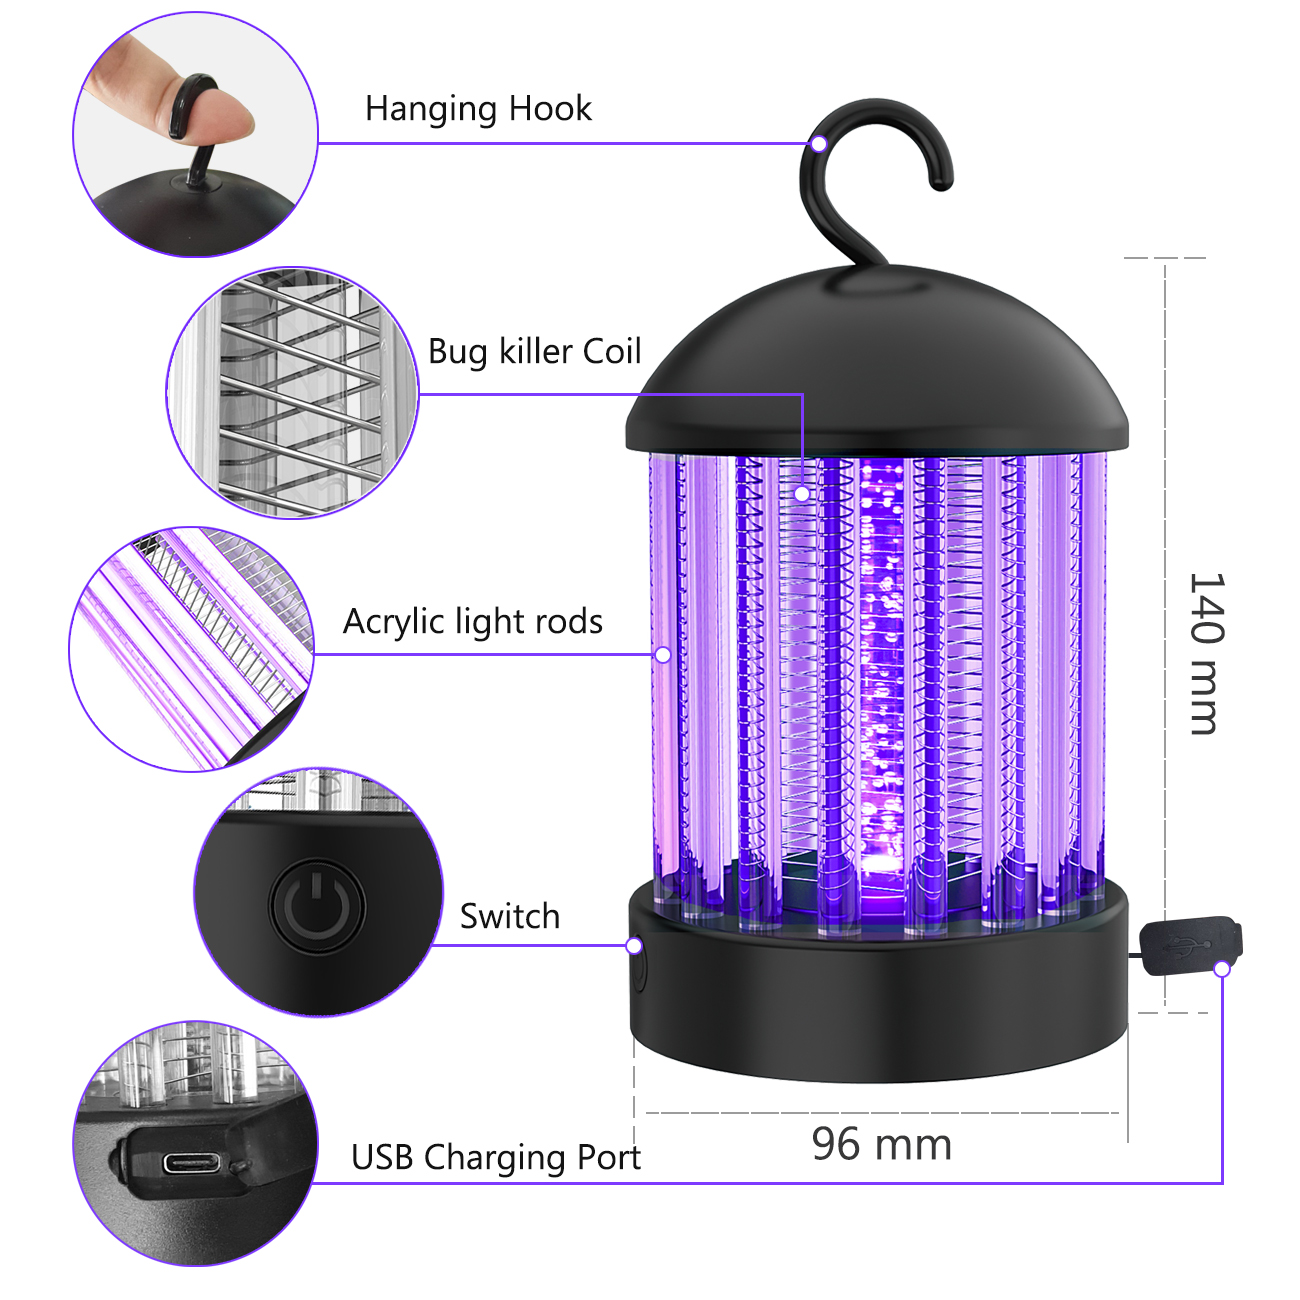 Electronic Mosquito Killer Lamp,Bug Zapper with Light Mosquito Trap, Fly Zapper Insect Killer Safety & Non-Toxic for Home Indoor/Outdoor Bedroom Kitchen Use